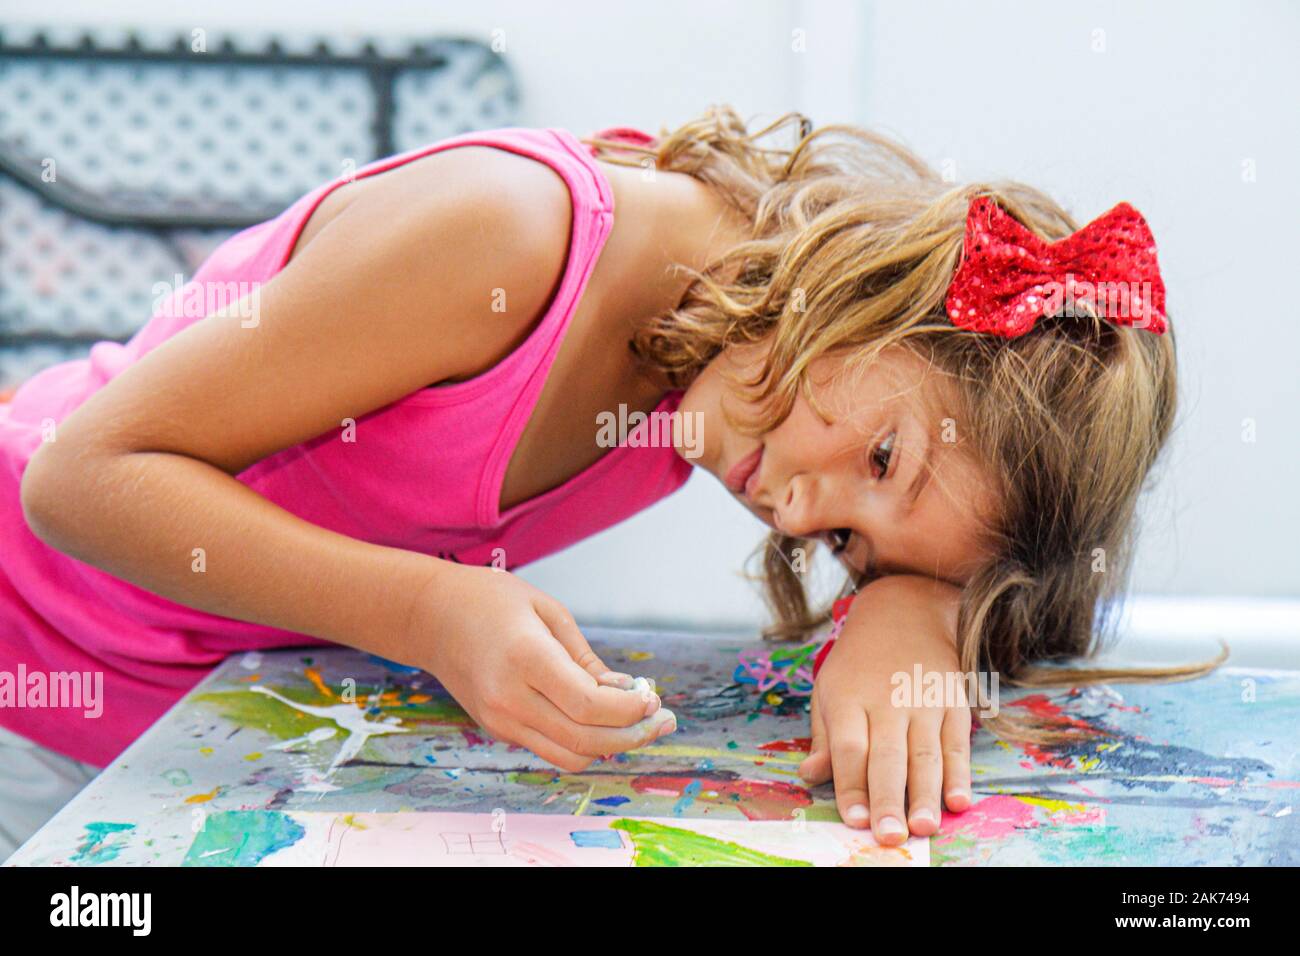 Miami Beach Florida,ArtCenter SouthFlorida Art Camp,class,girl girls,youngster youngsters youth youths female kid kids child children,chalk,drawing,vi Stock Photo